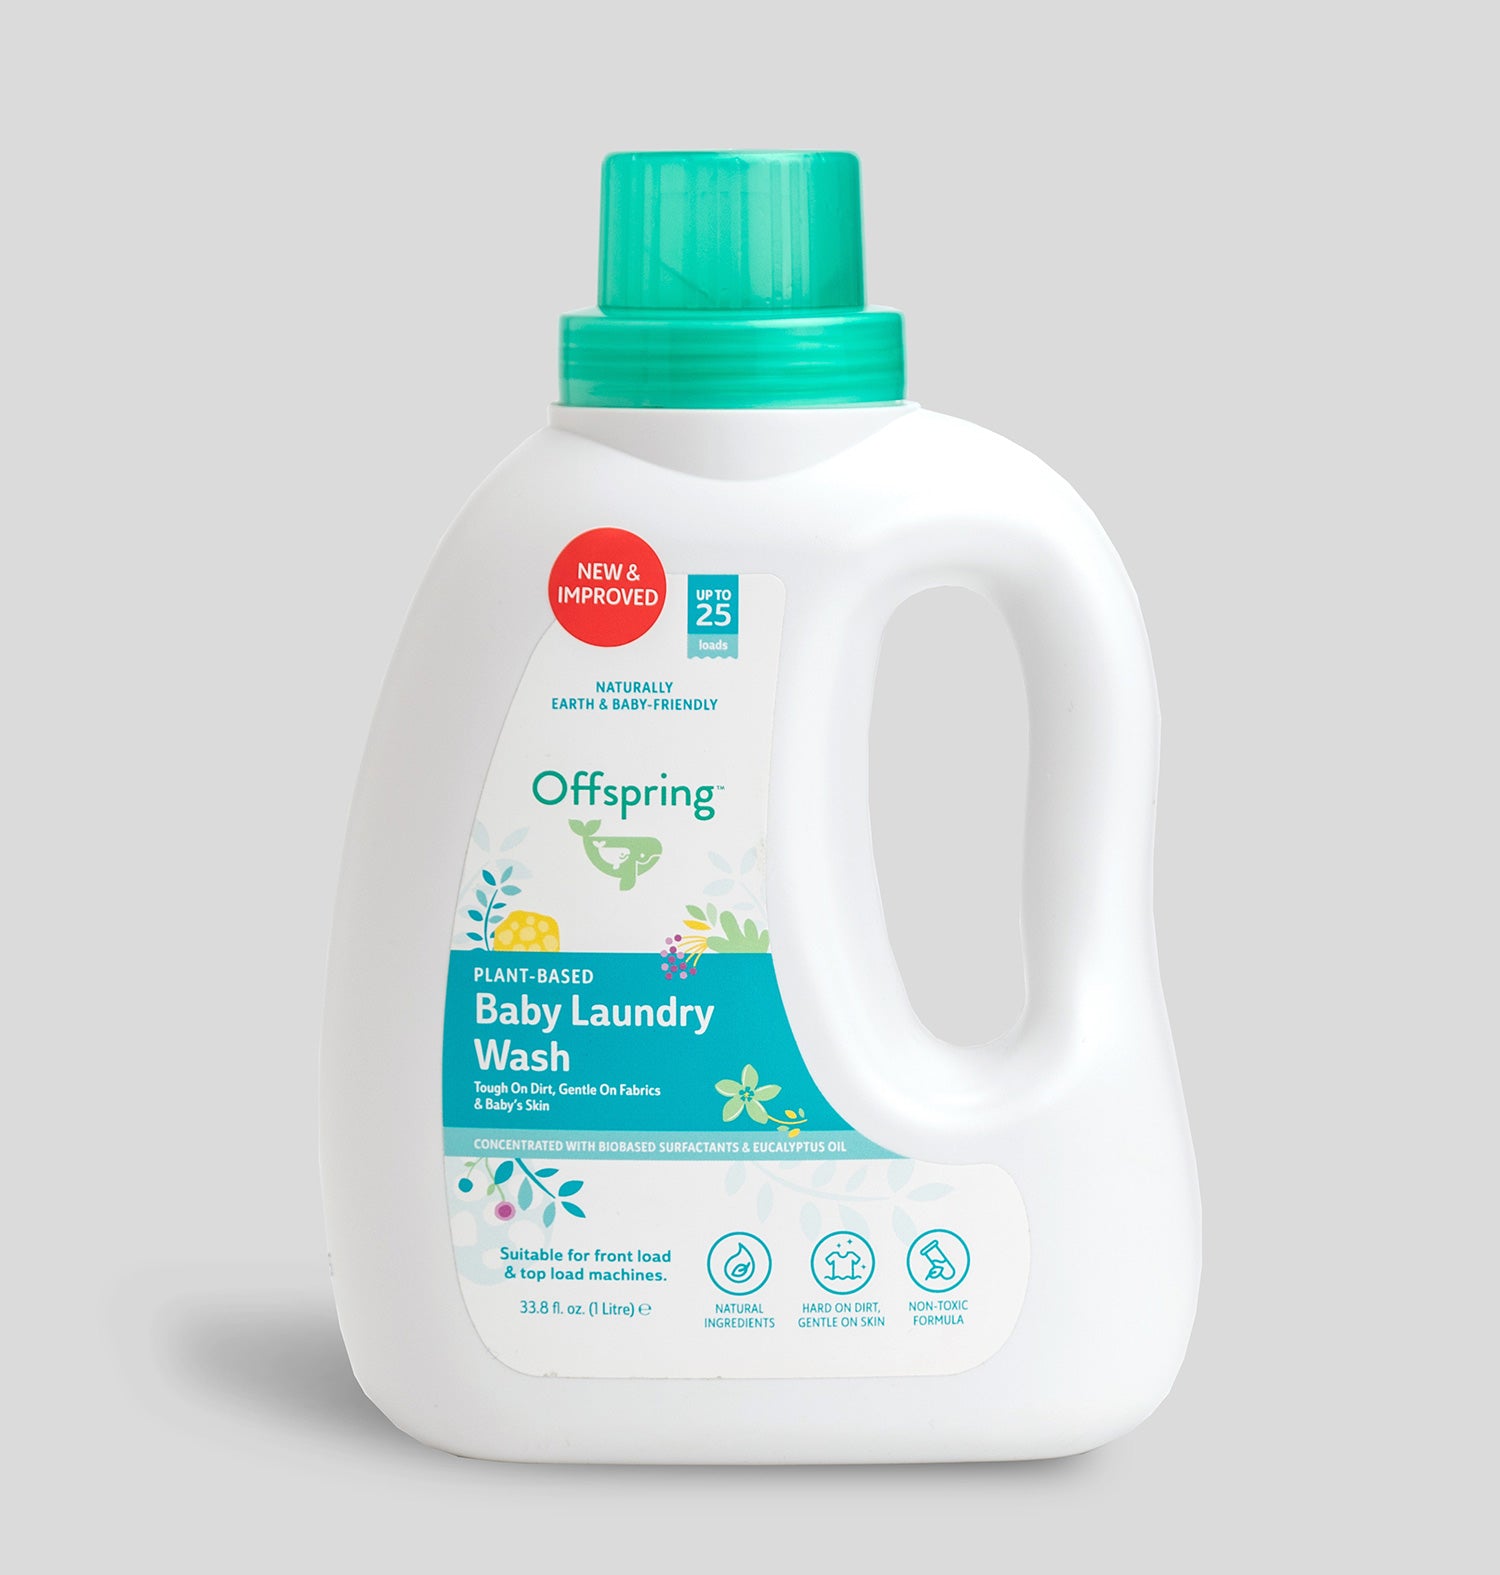 [Offspring] Baby Laundry Wash